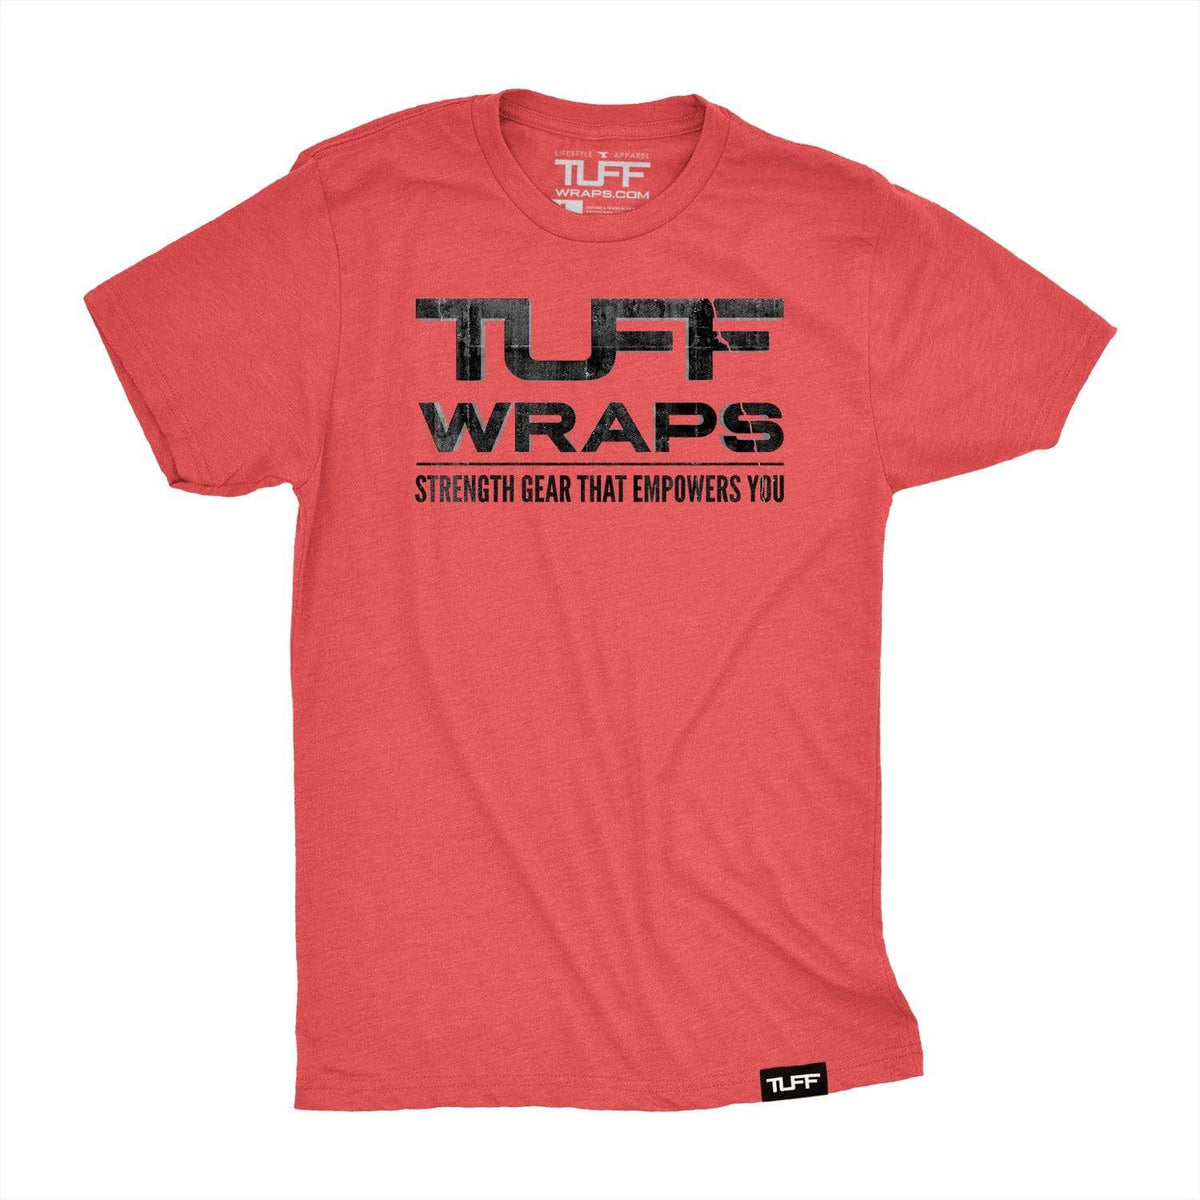 TuffWraps Strength Gear That Empowers You Tee